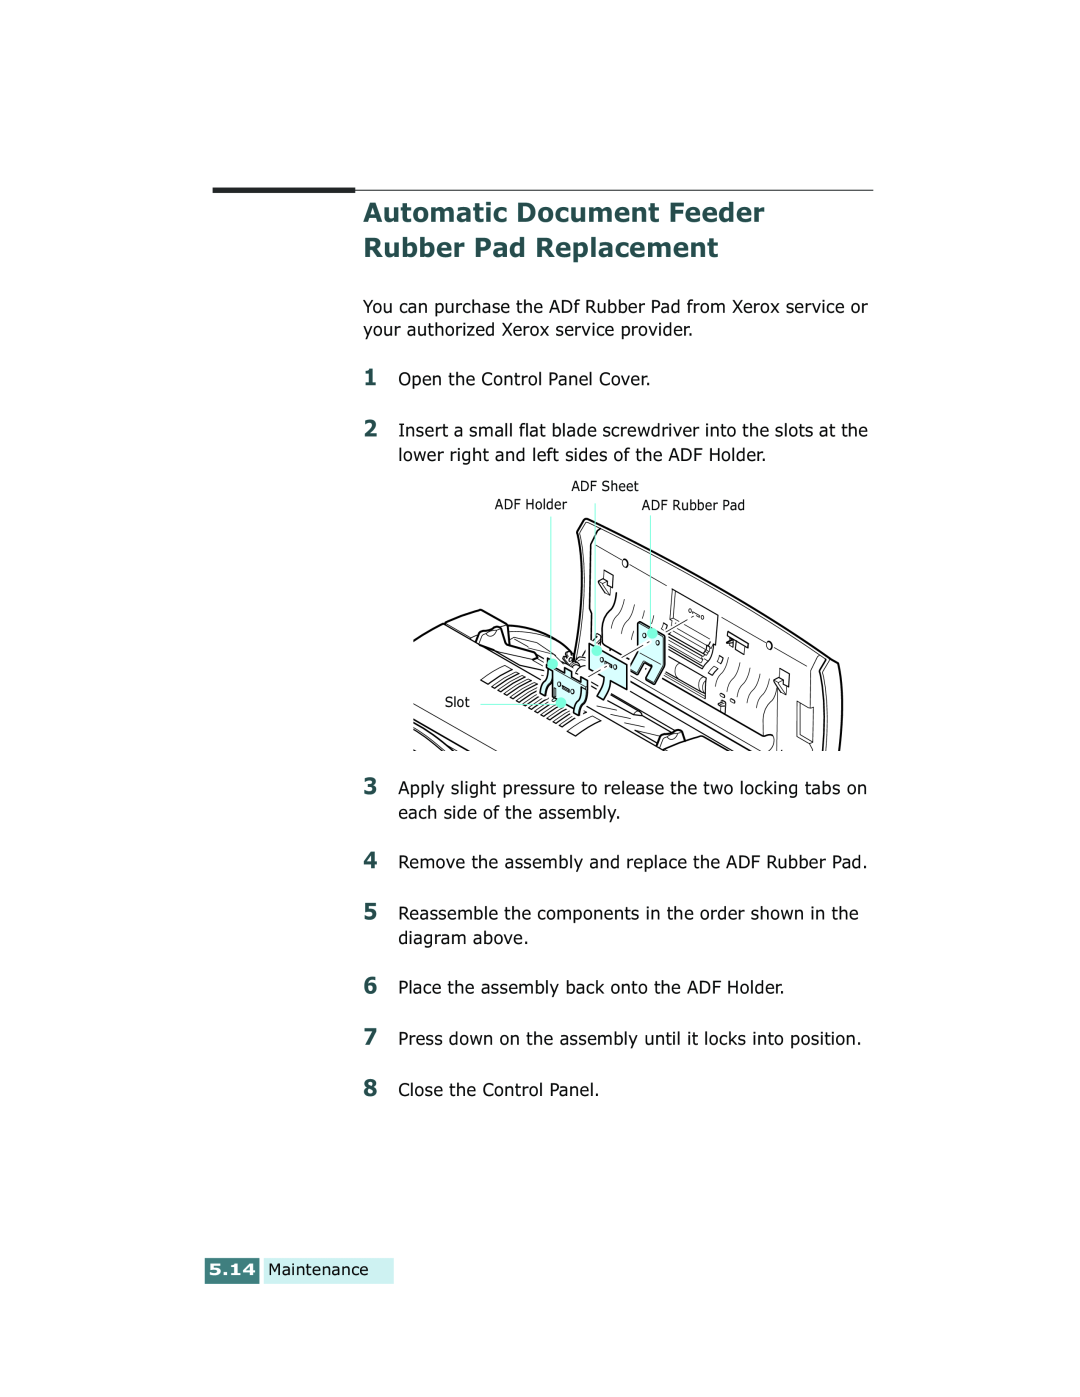 Xerox Pro 580 manual Automatic Document Feeder Rubber Pad Replacement 